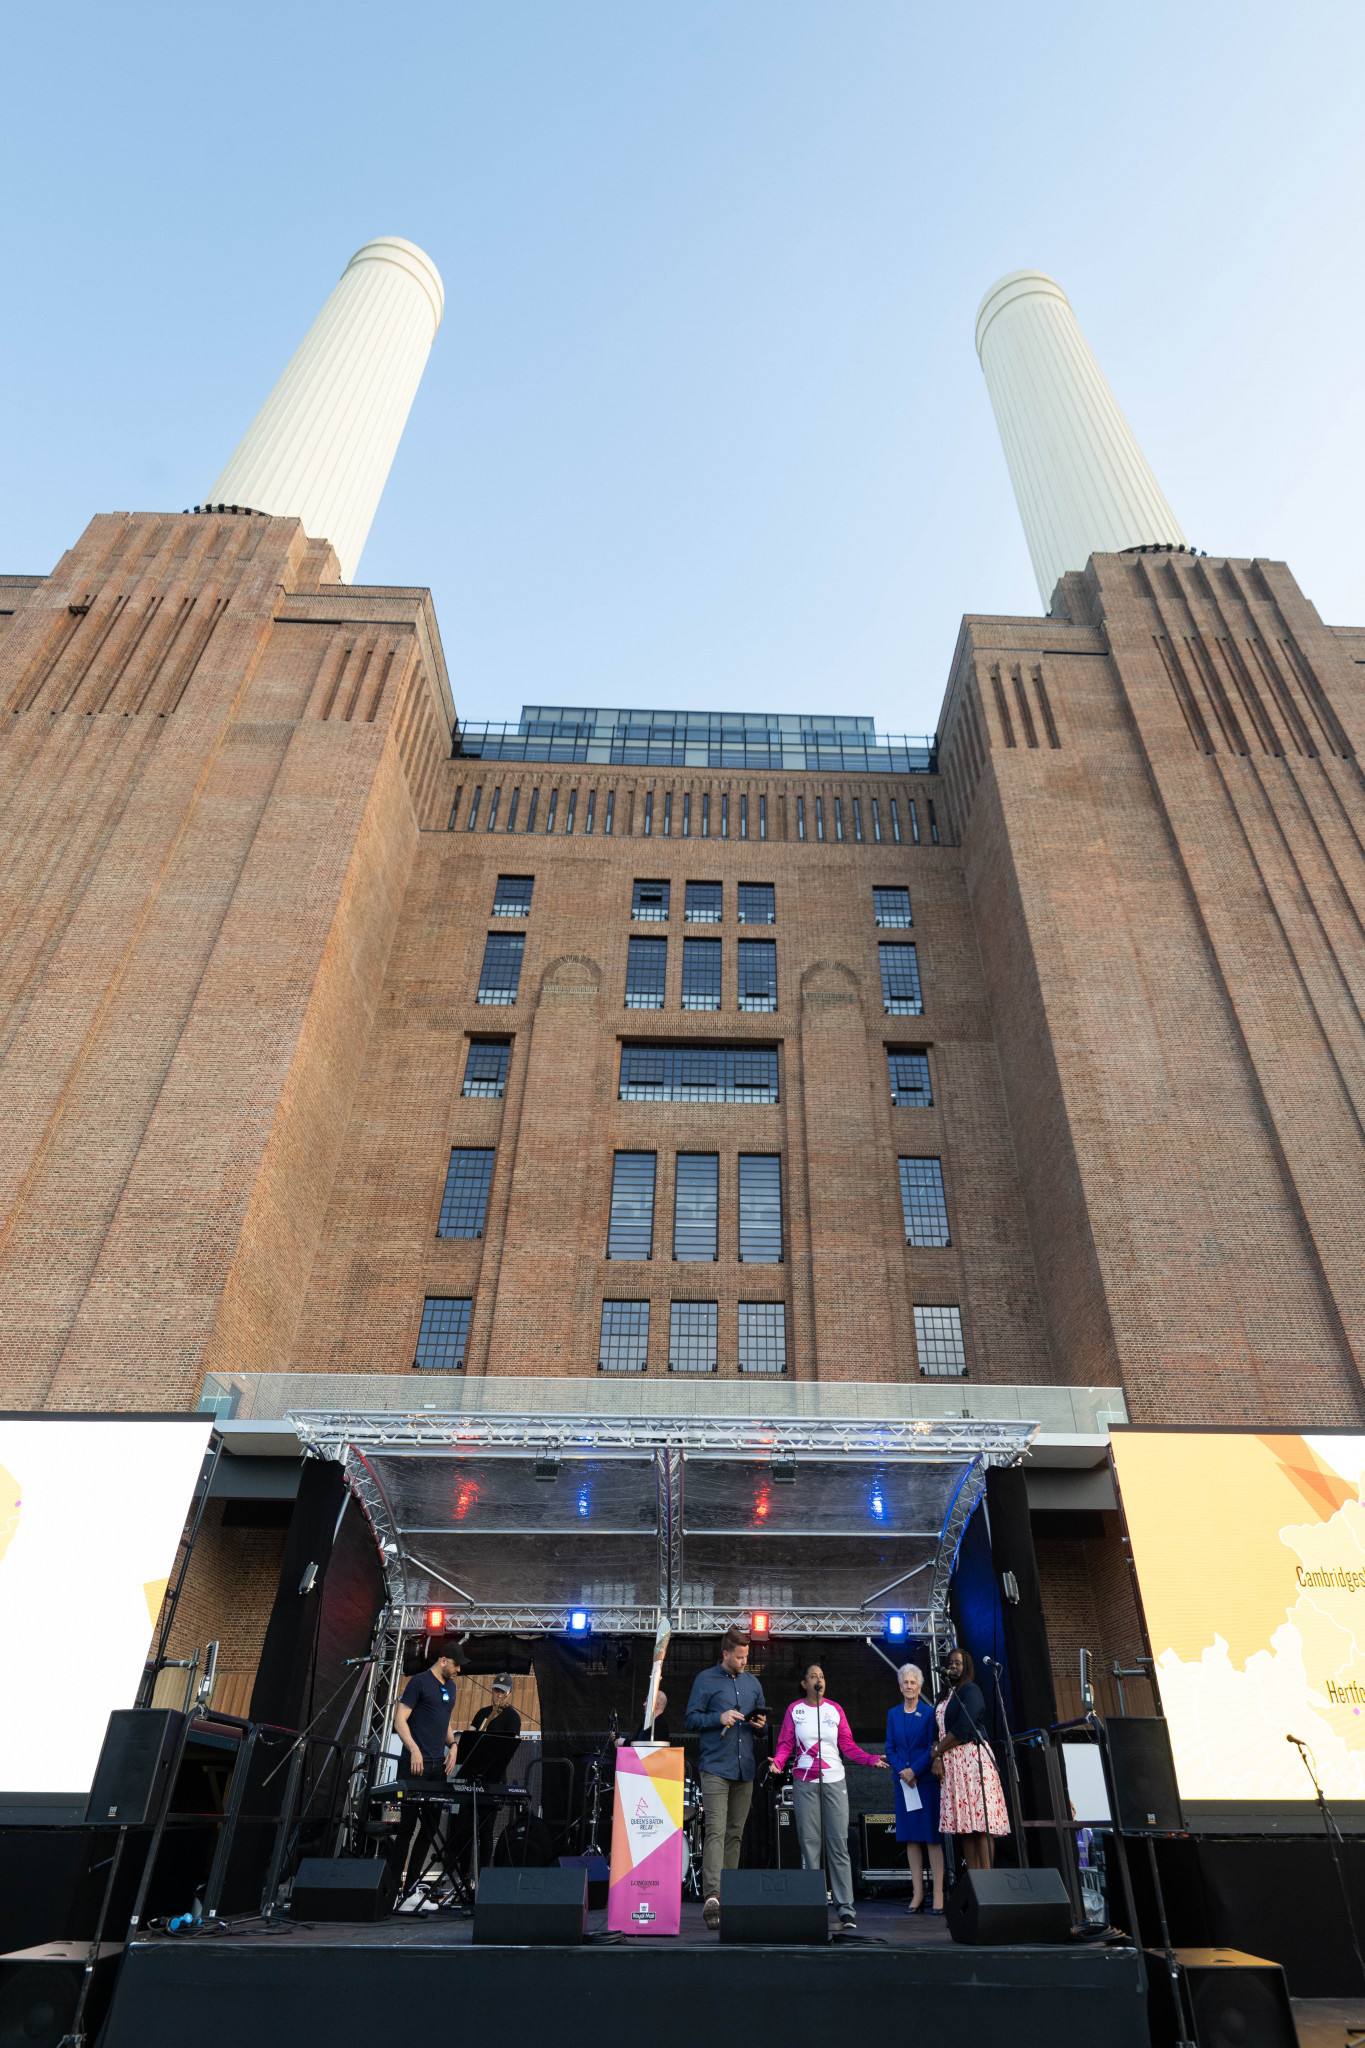 The Baton carrying the Queen's message to athletes of the Commonwealth arrived on a sunlit evening at Battersea Power Station ©Birmingham 2022